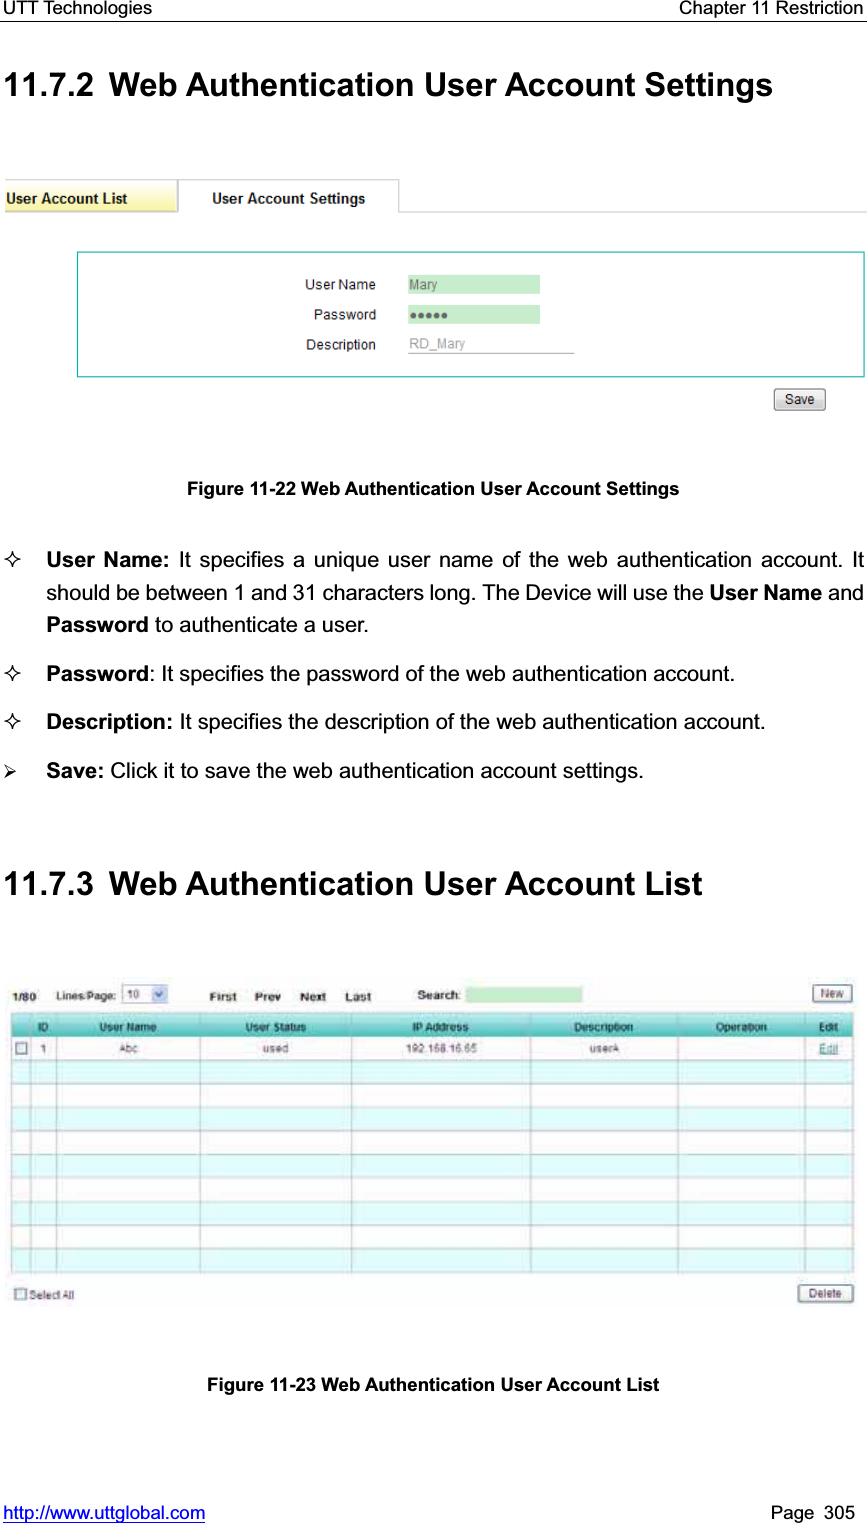 UTT Technologies    Chapter 11 Restriction   http://www.uttglobal.com Page 305 11.7.2  Web Authentication User Account Settings Figure 11-22 Web Authentication User Account Settings User Name: It specifies a unique user name of the web authentication account. It should be between 1 and 31 characters long. The Device will use the User Name and Password to authenticate a user.   Password: It specifies the password of the web authentication account. Description: It specifies the description of the web authentication account. ¾Save: Click it to save the web authentication account settings.11.7.3  Web Authentication User Account List Figure 11-23 Web Authentication User Account List 